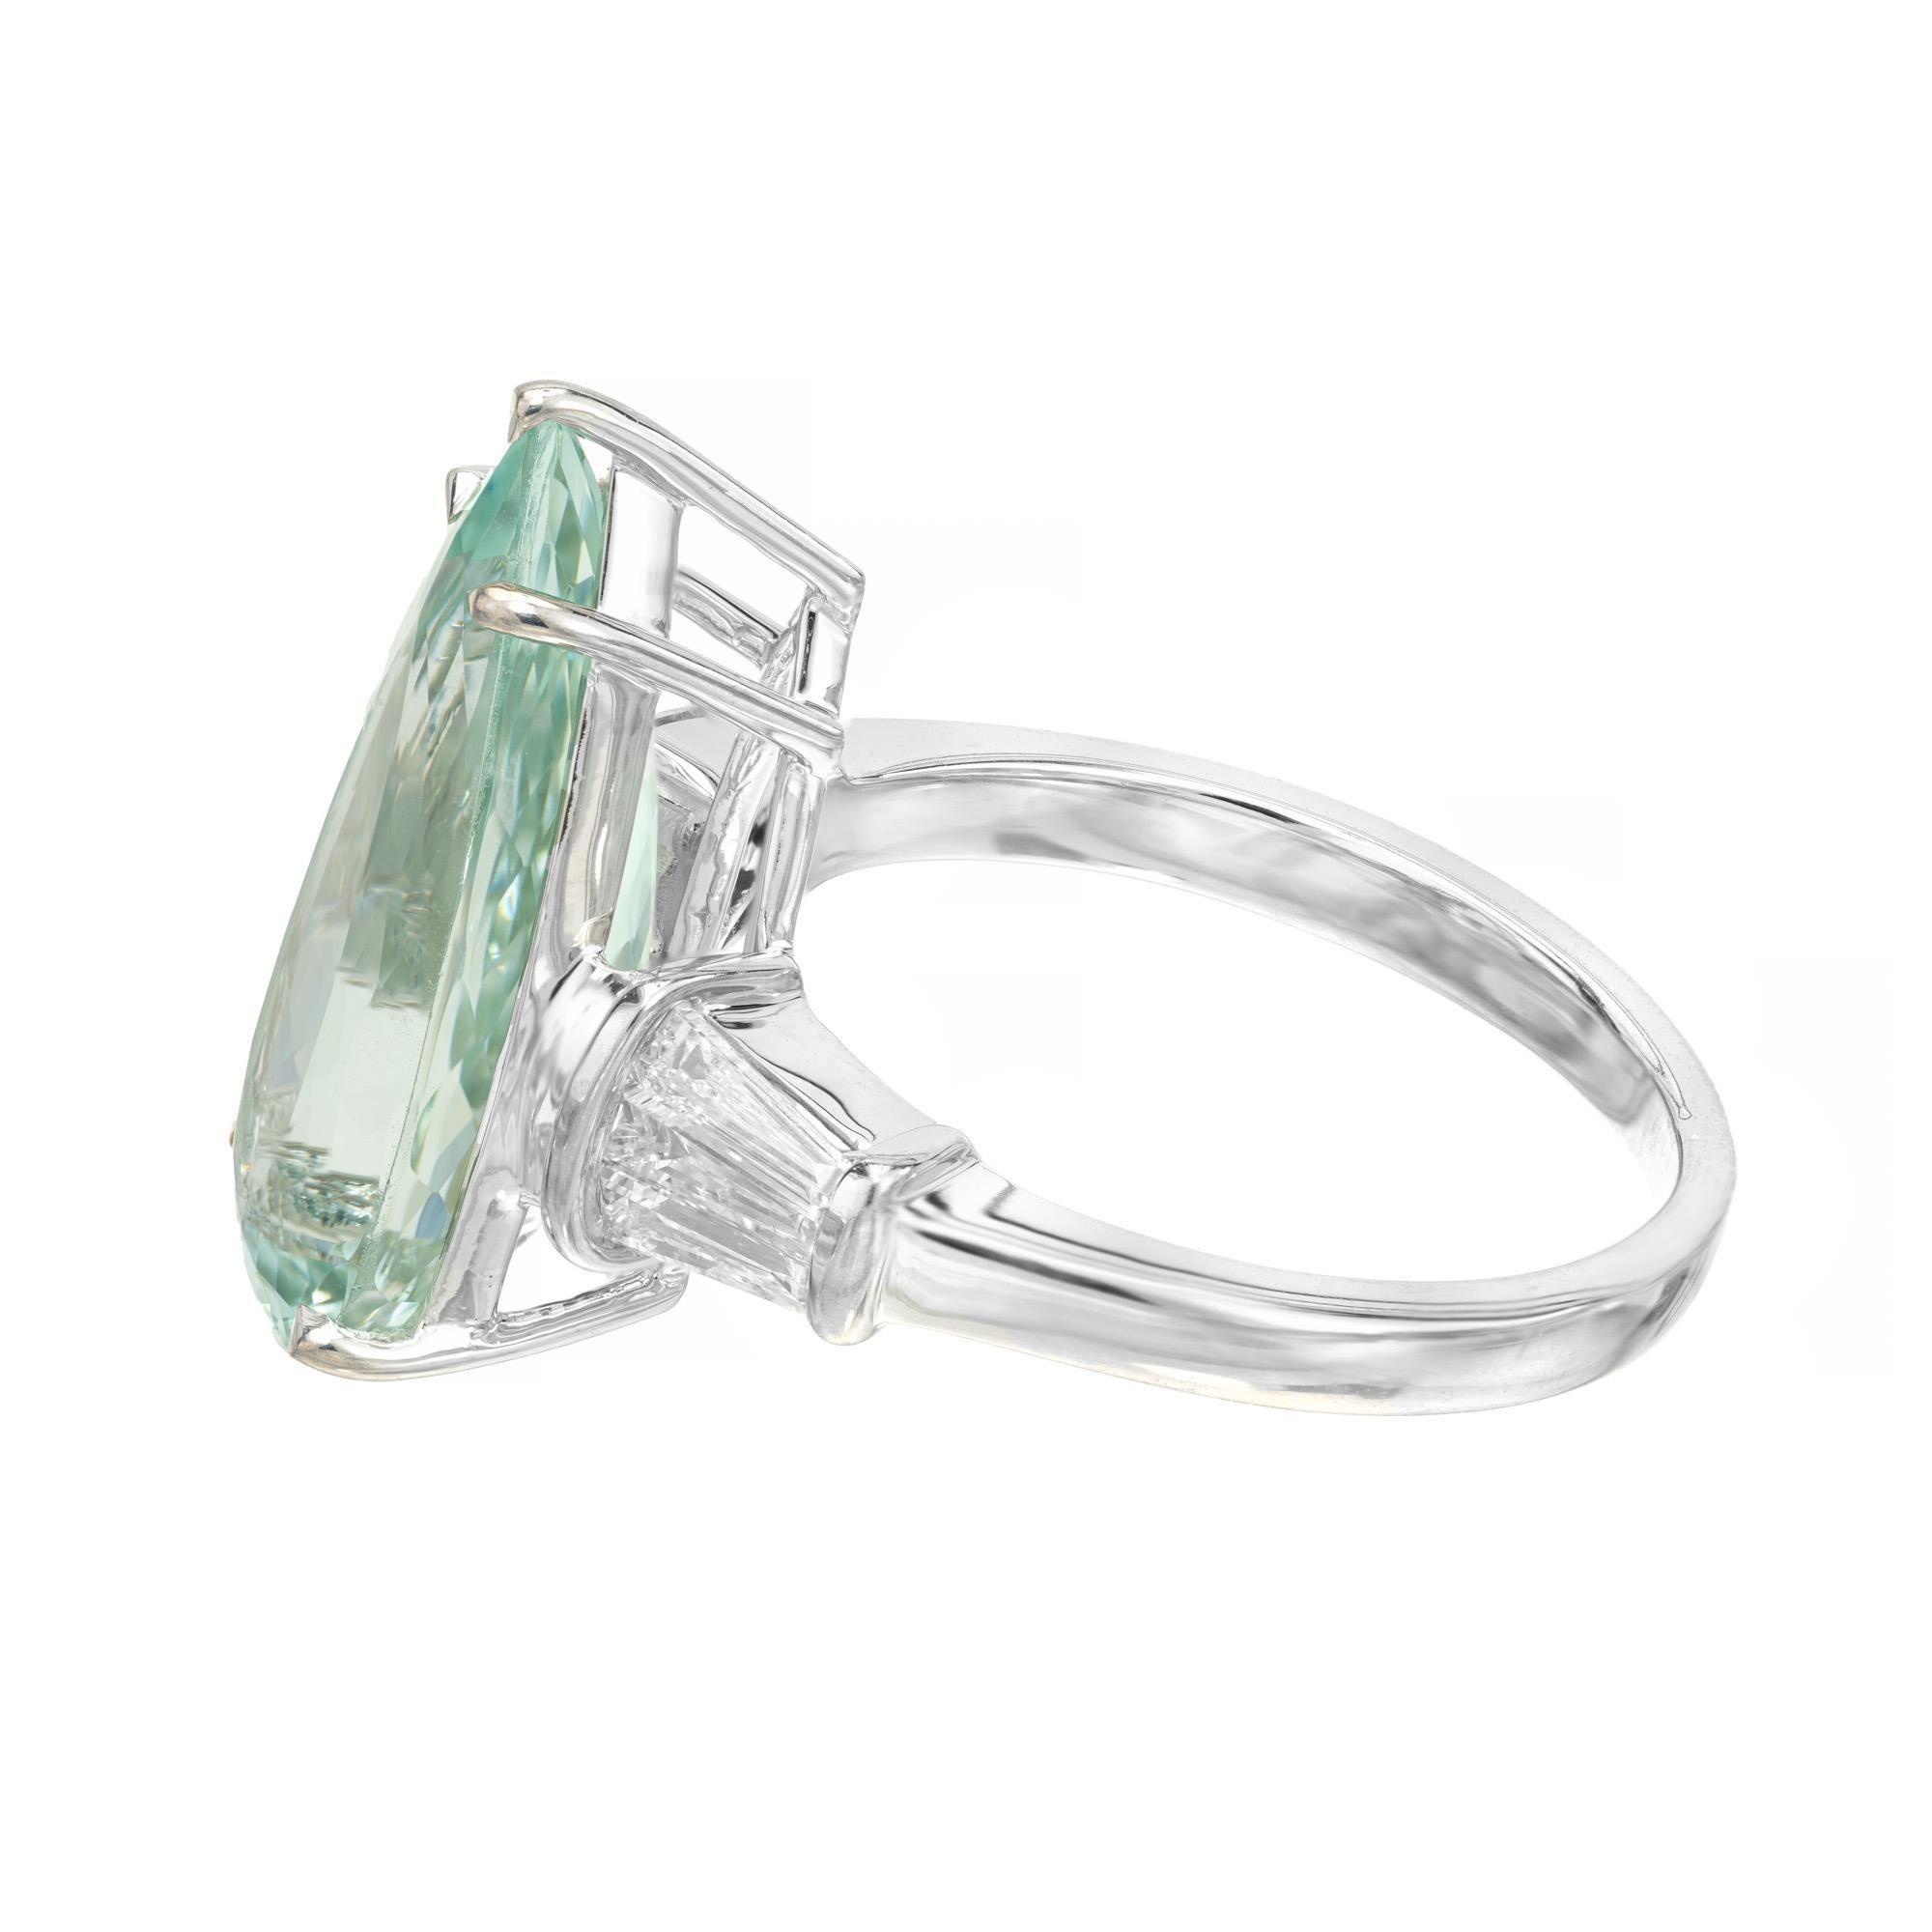 4.63 Carat Pear Aquamarine Diamond White Gold Mid-Century Ring  In Good Condition For Sale In Stamford, CT